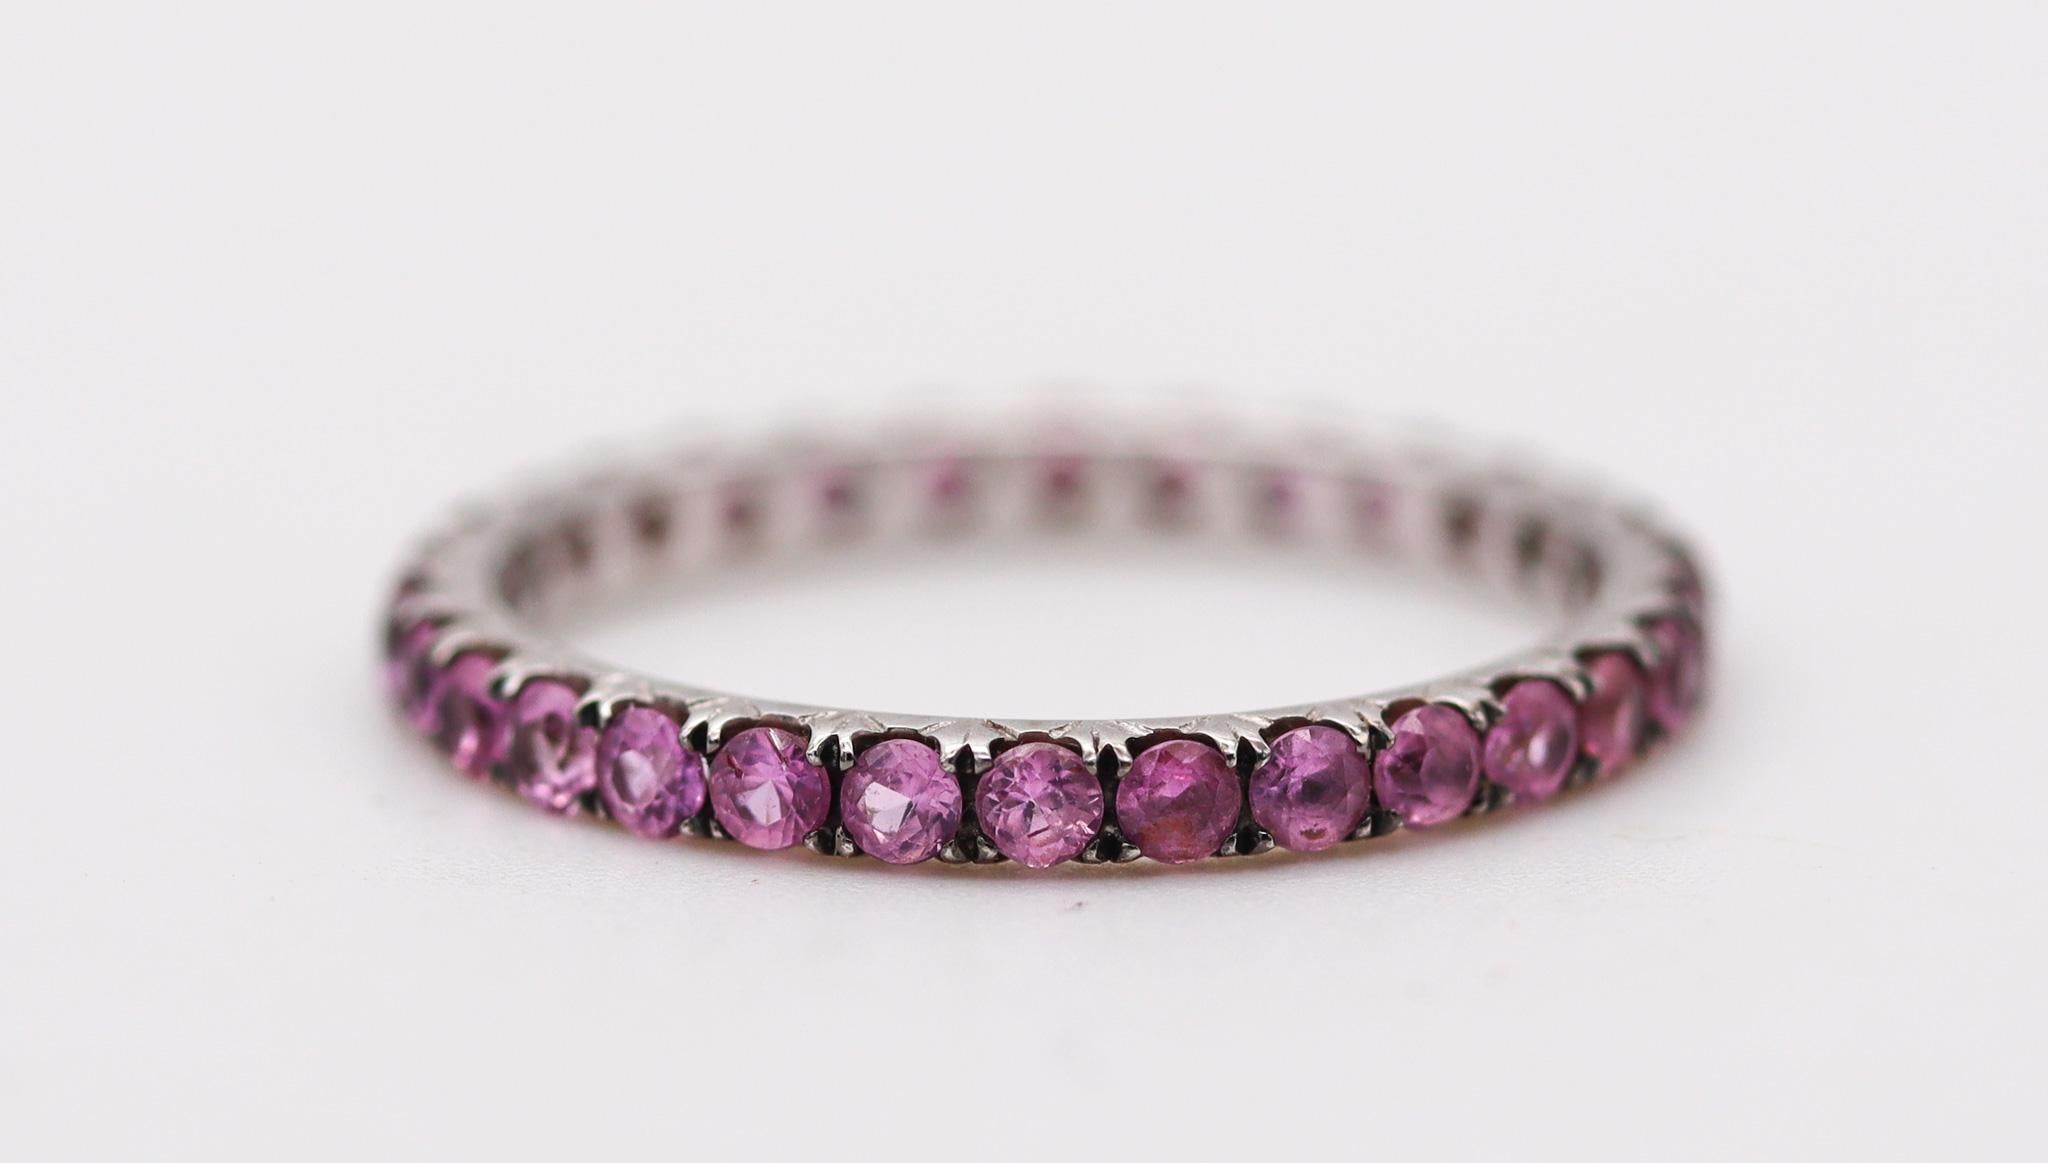 Eternity band with pink sapphires.

Beautiful eternity ring band, crafted in Italy in solid white gold of 18 karats with high polished finish. Mounted with a great selection of thirty calibrated pink sapphires with accents of black